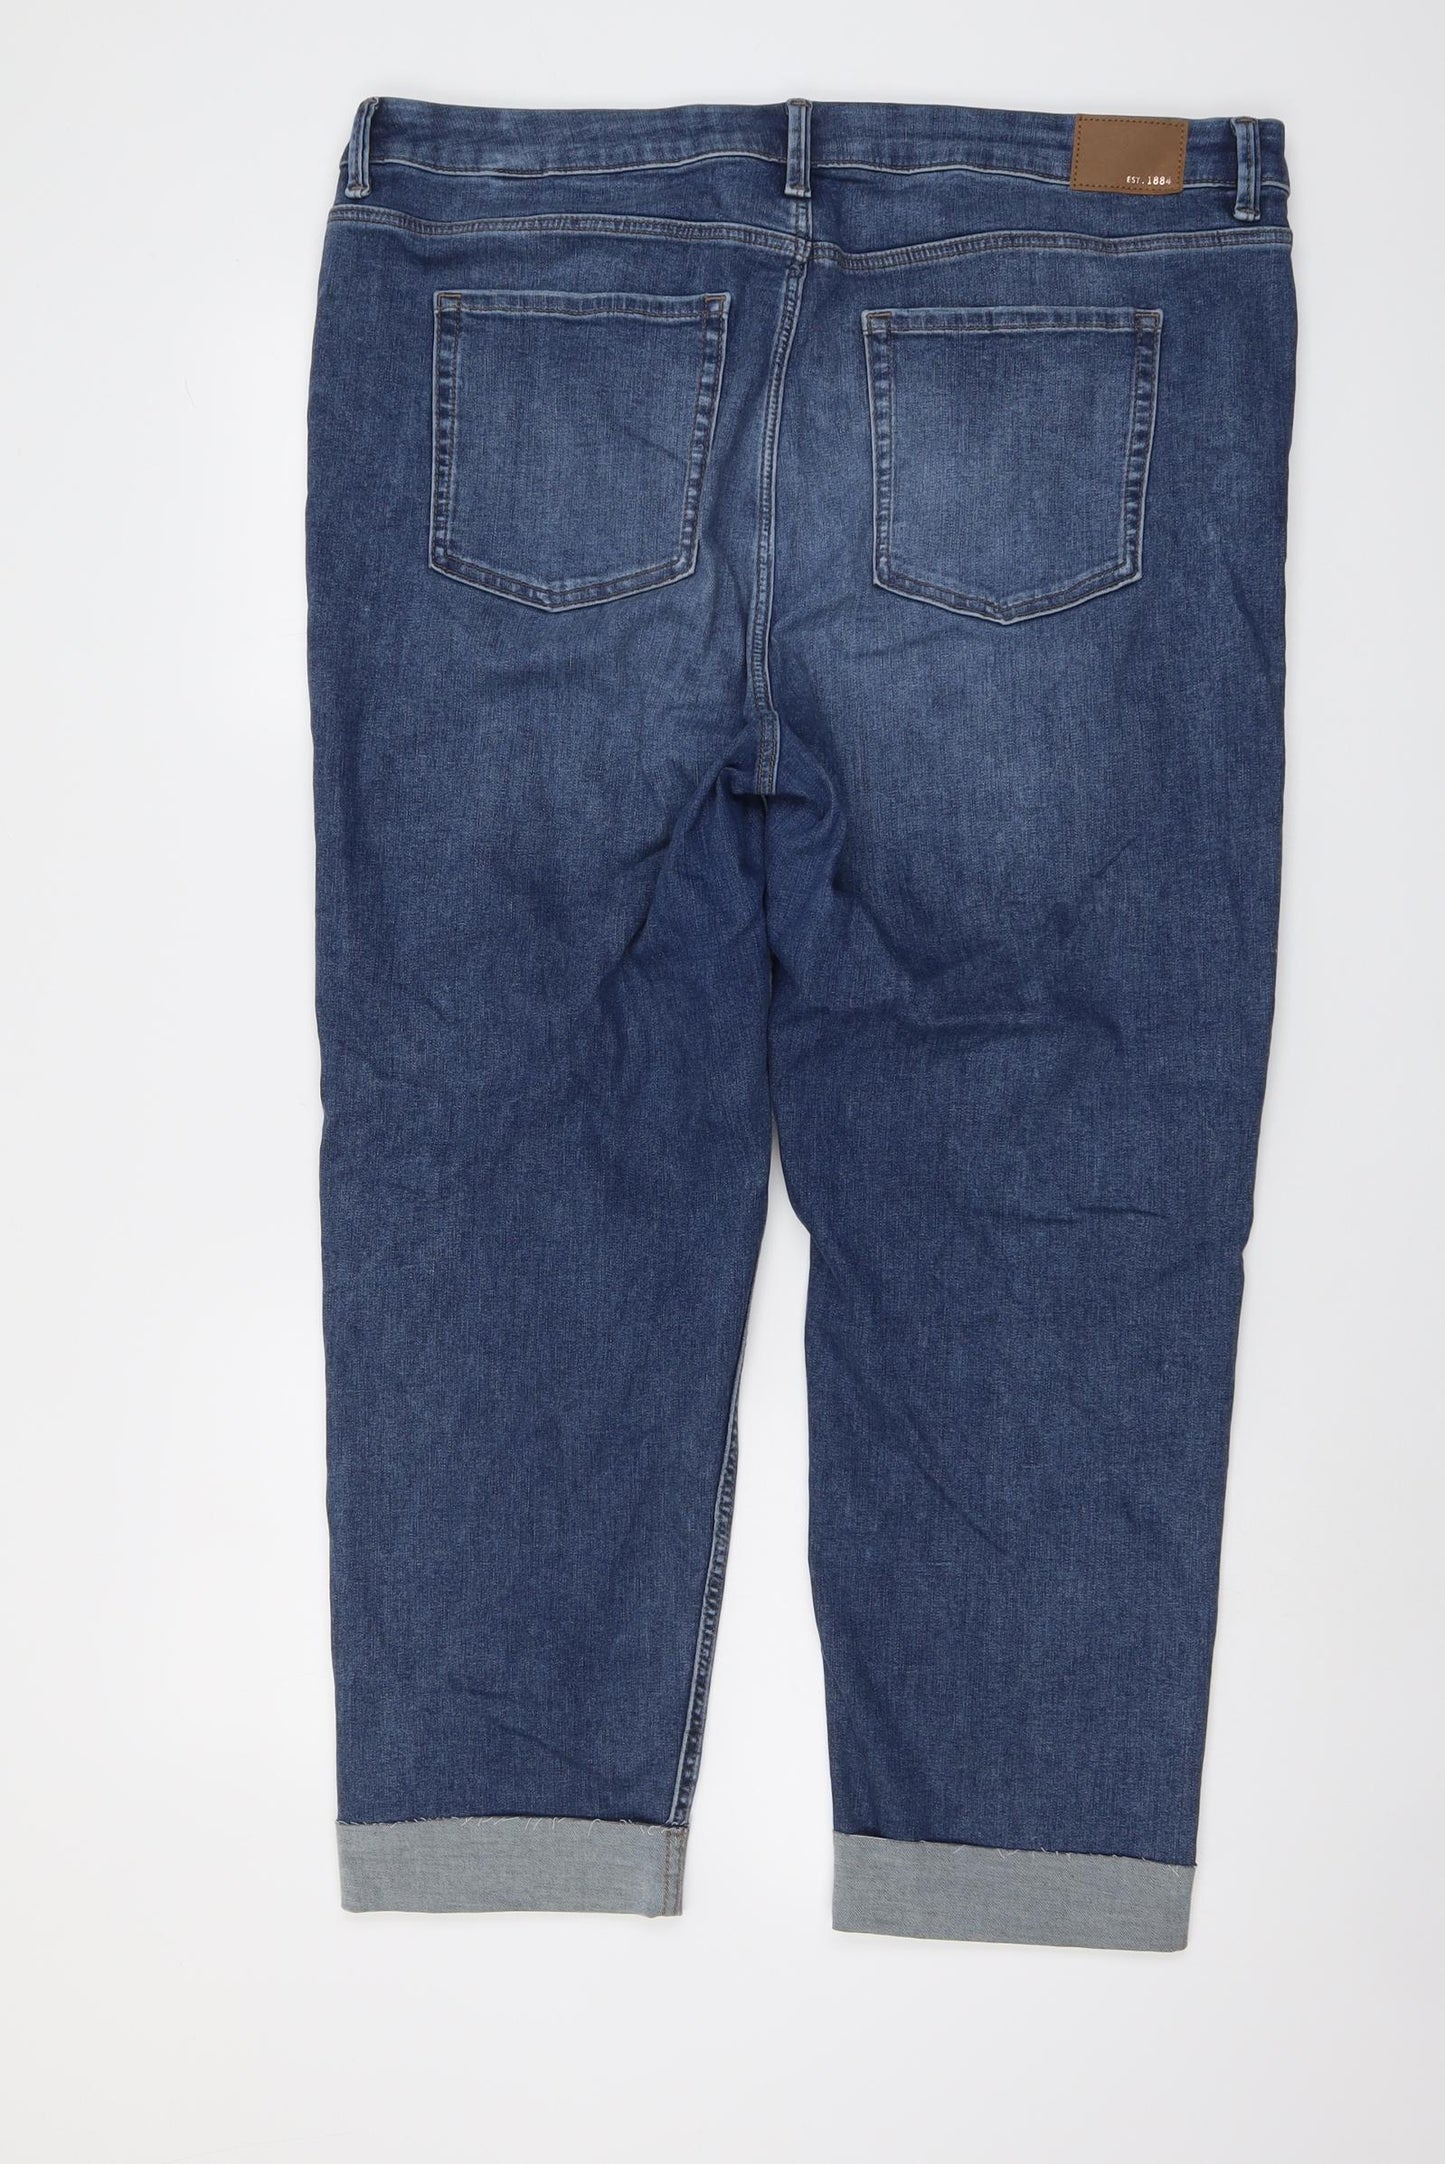 Marks and Spencer Womens Blue Cotton Mom Jeans Size 20 L25 in Regular Button